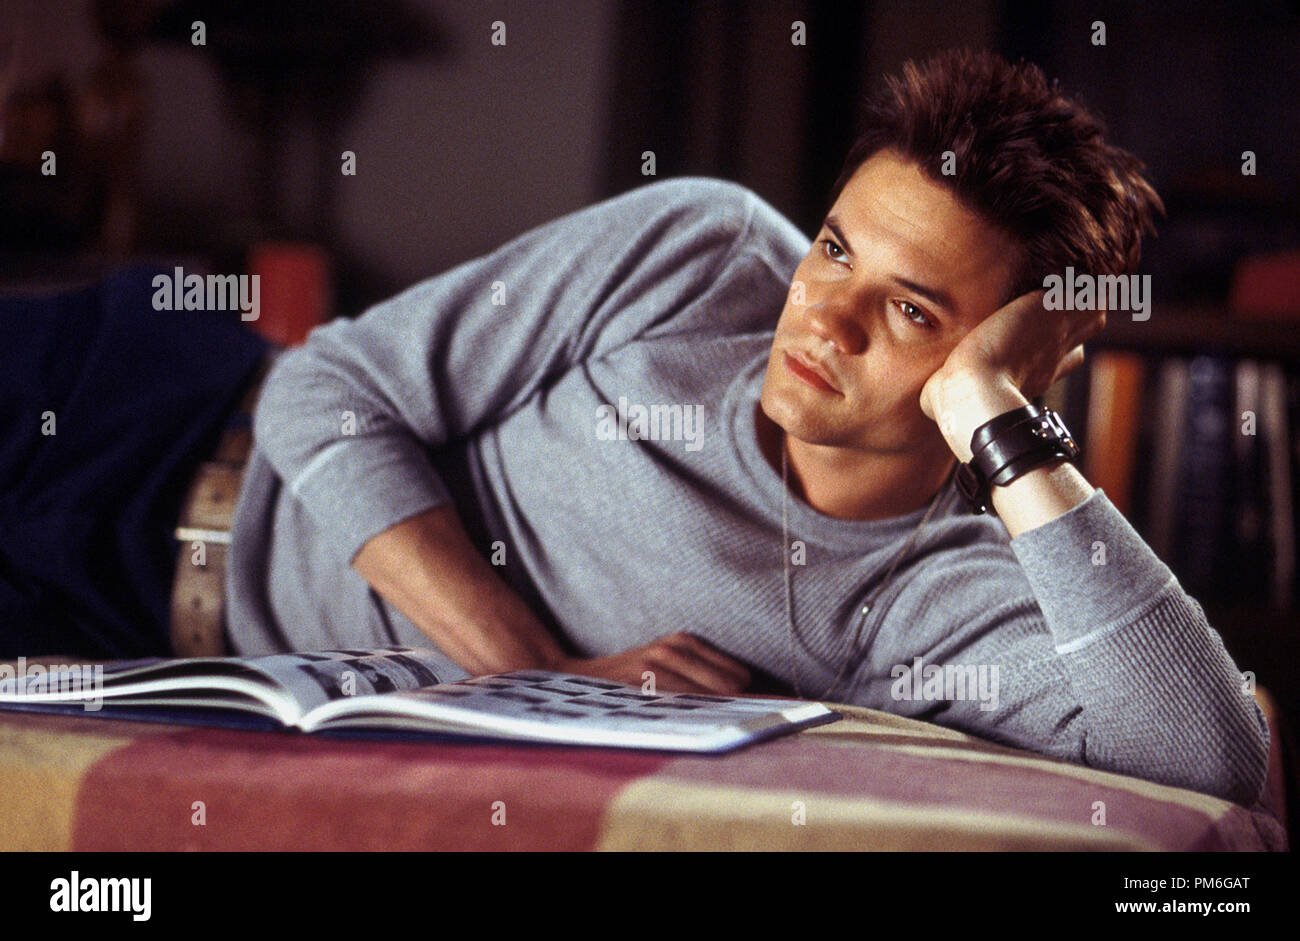 Film Still / Publicity Still from 'A Walk to Remember' Shane West © 2002 Warner Brothers Stock Photo